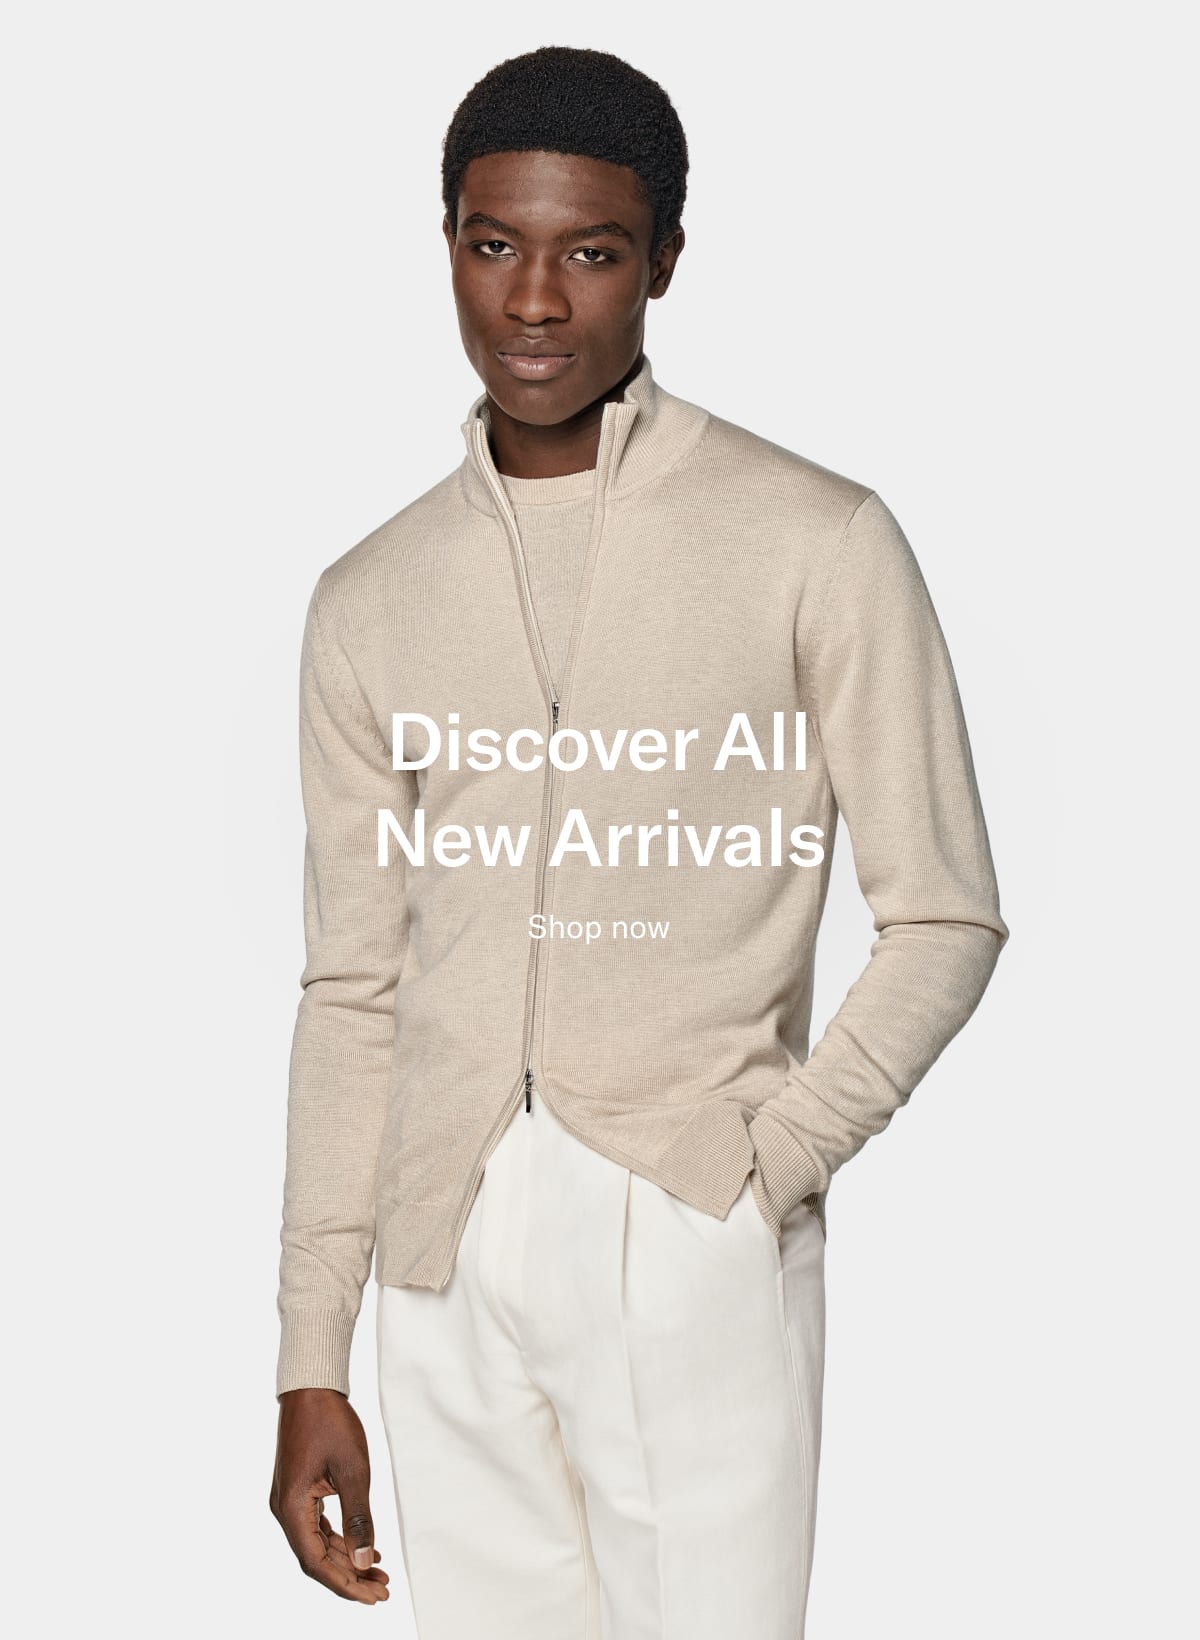 Discover all new arrivals